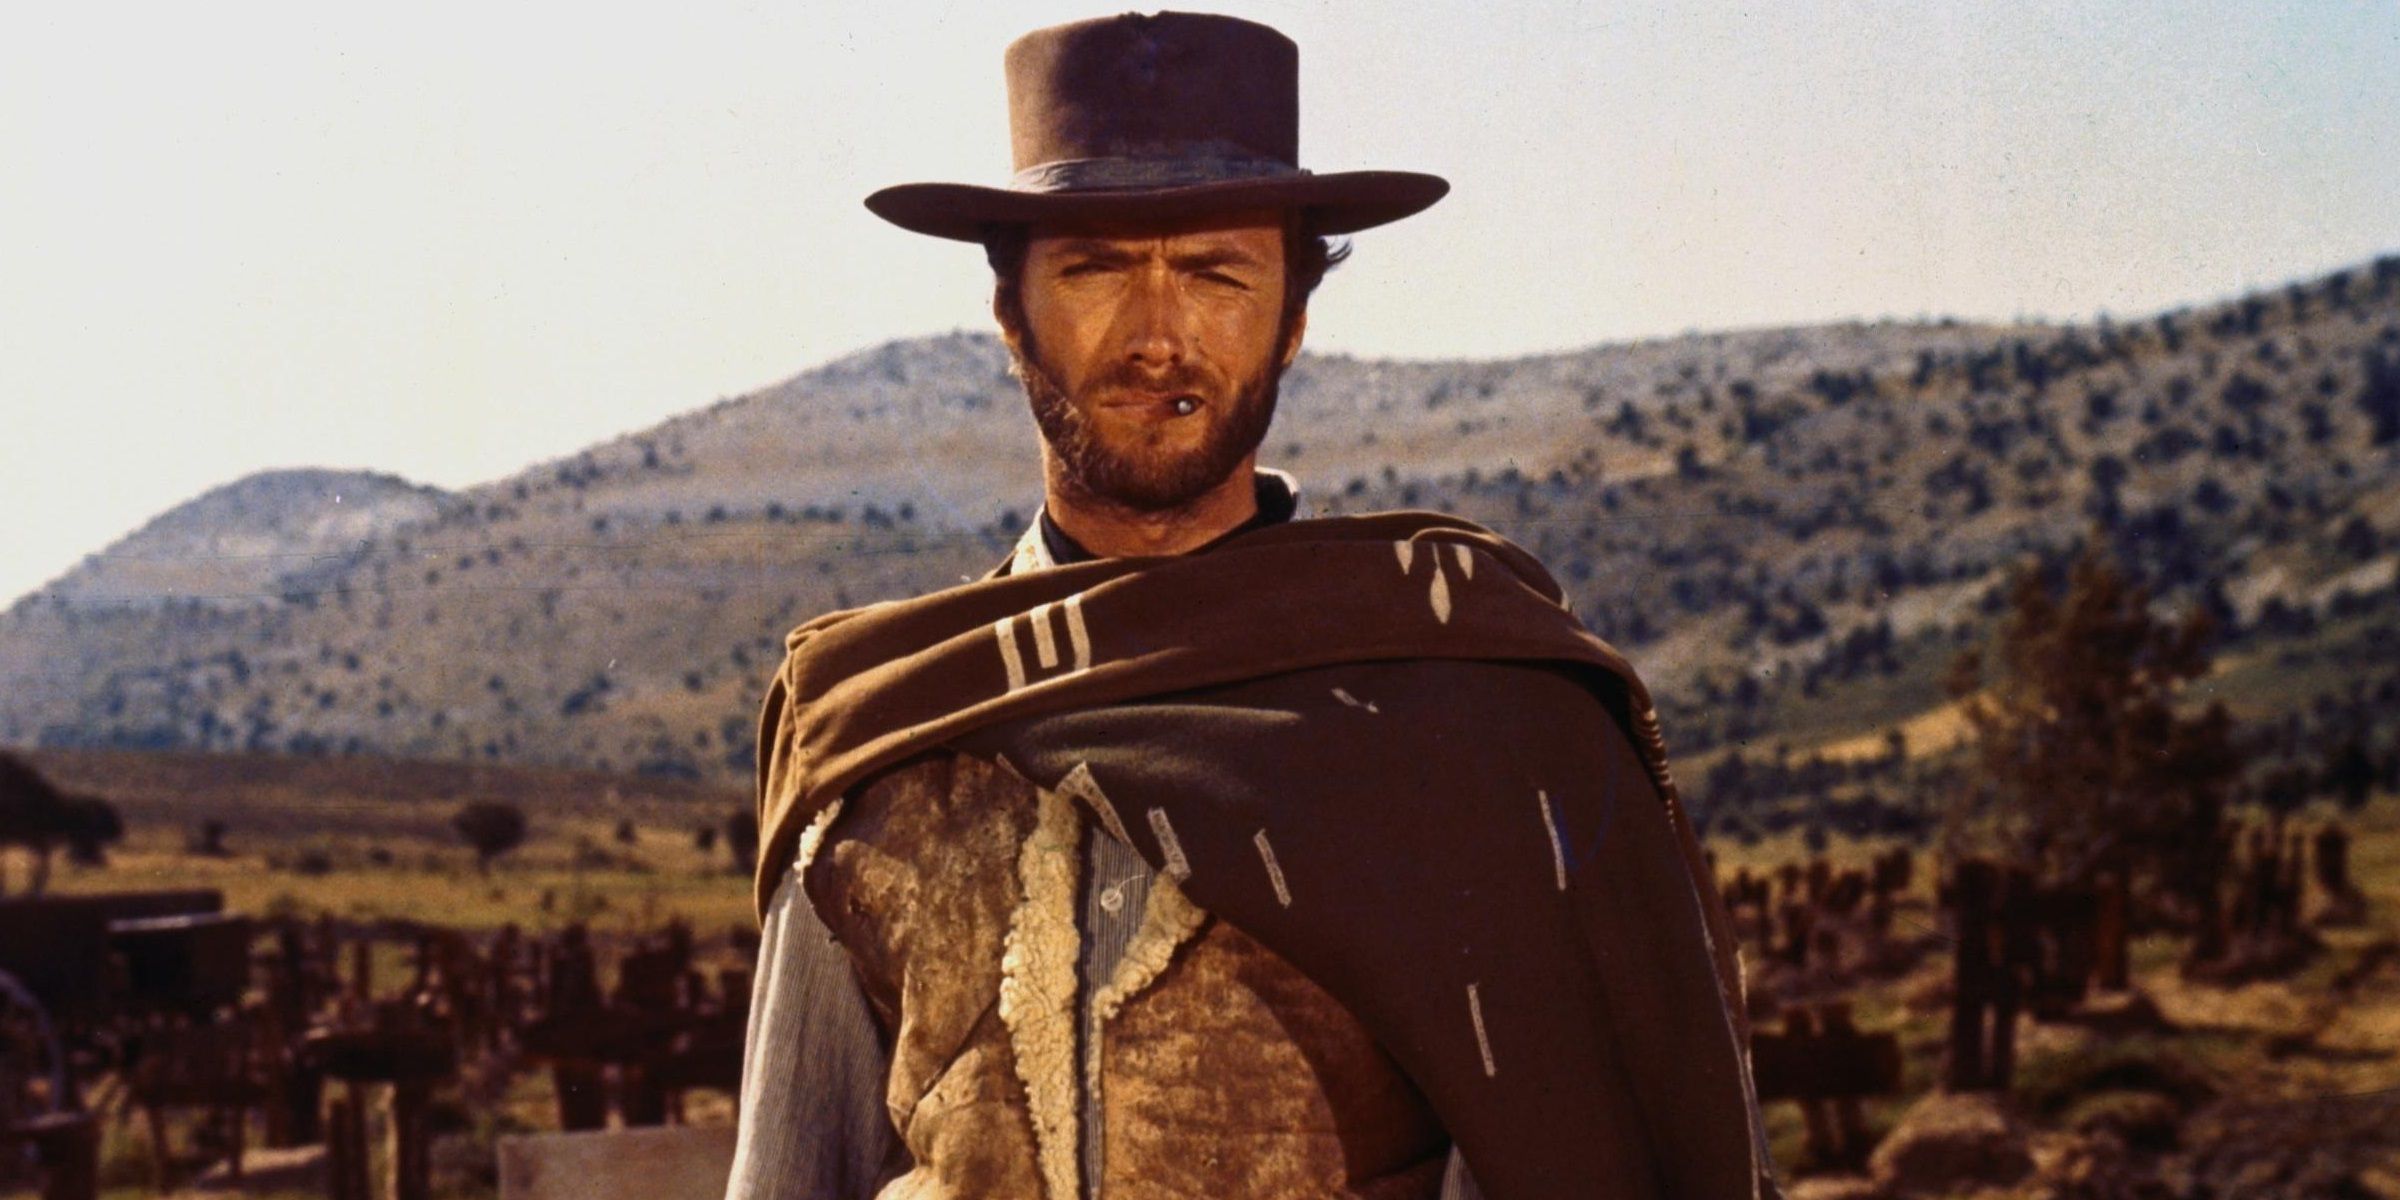 Clint Eastwood as the Man with No Name in The Good, the Bad, and the Ugly